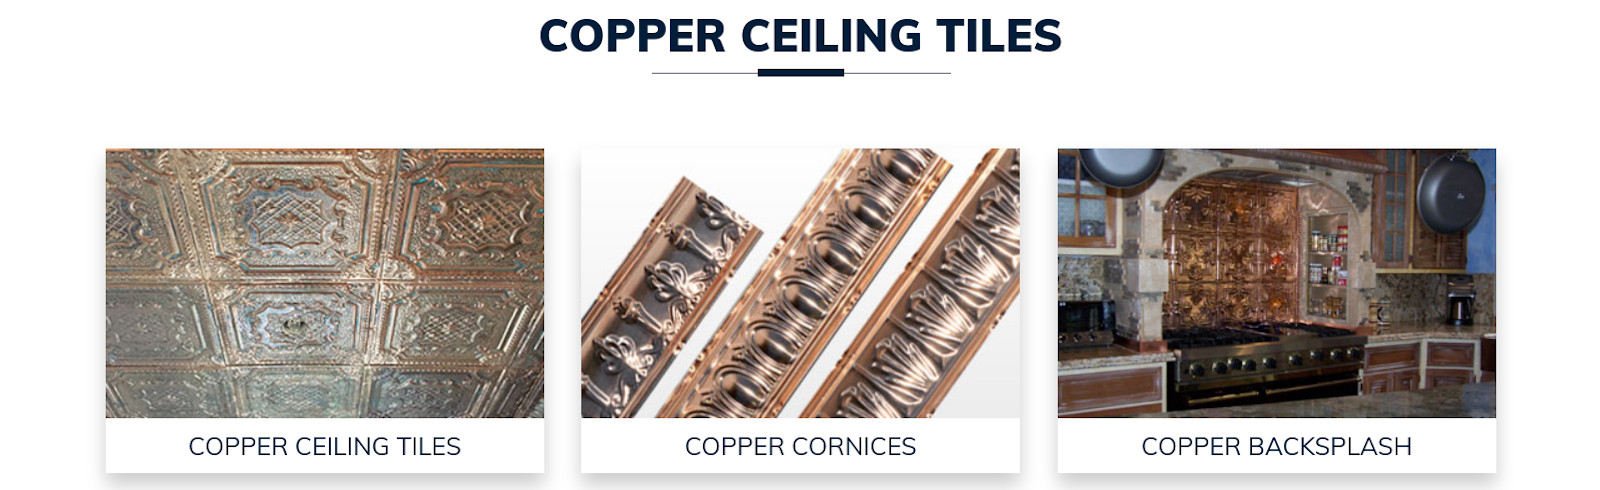 copper ceiling tiles discounted